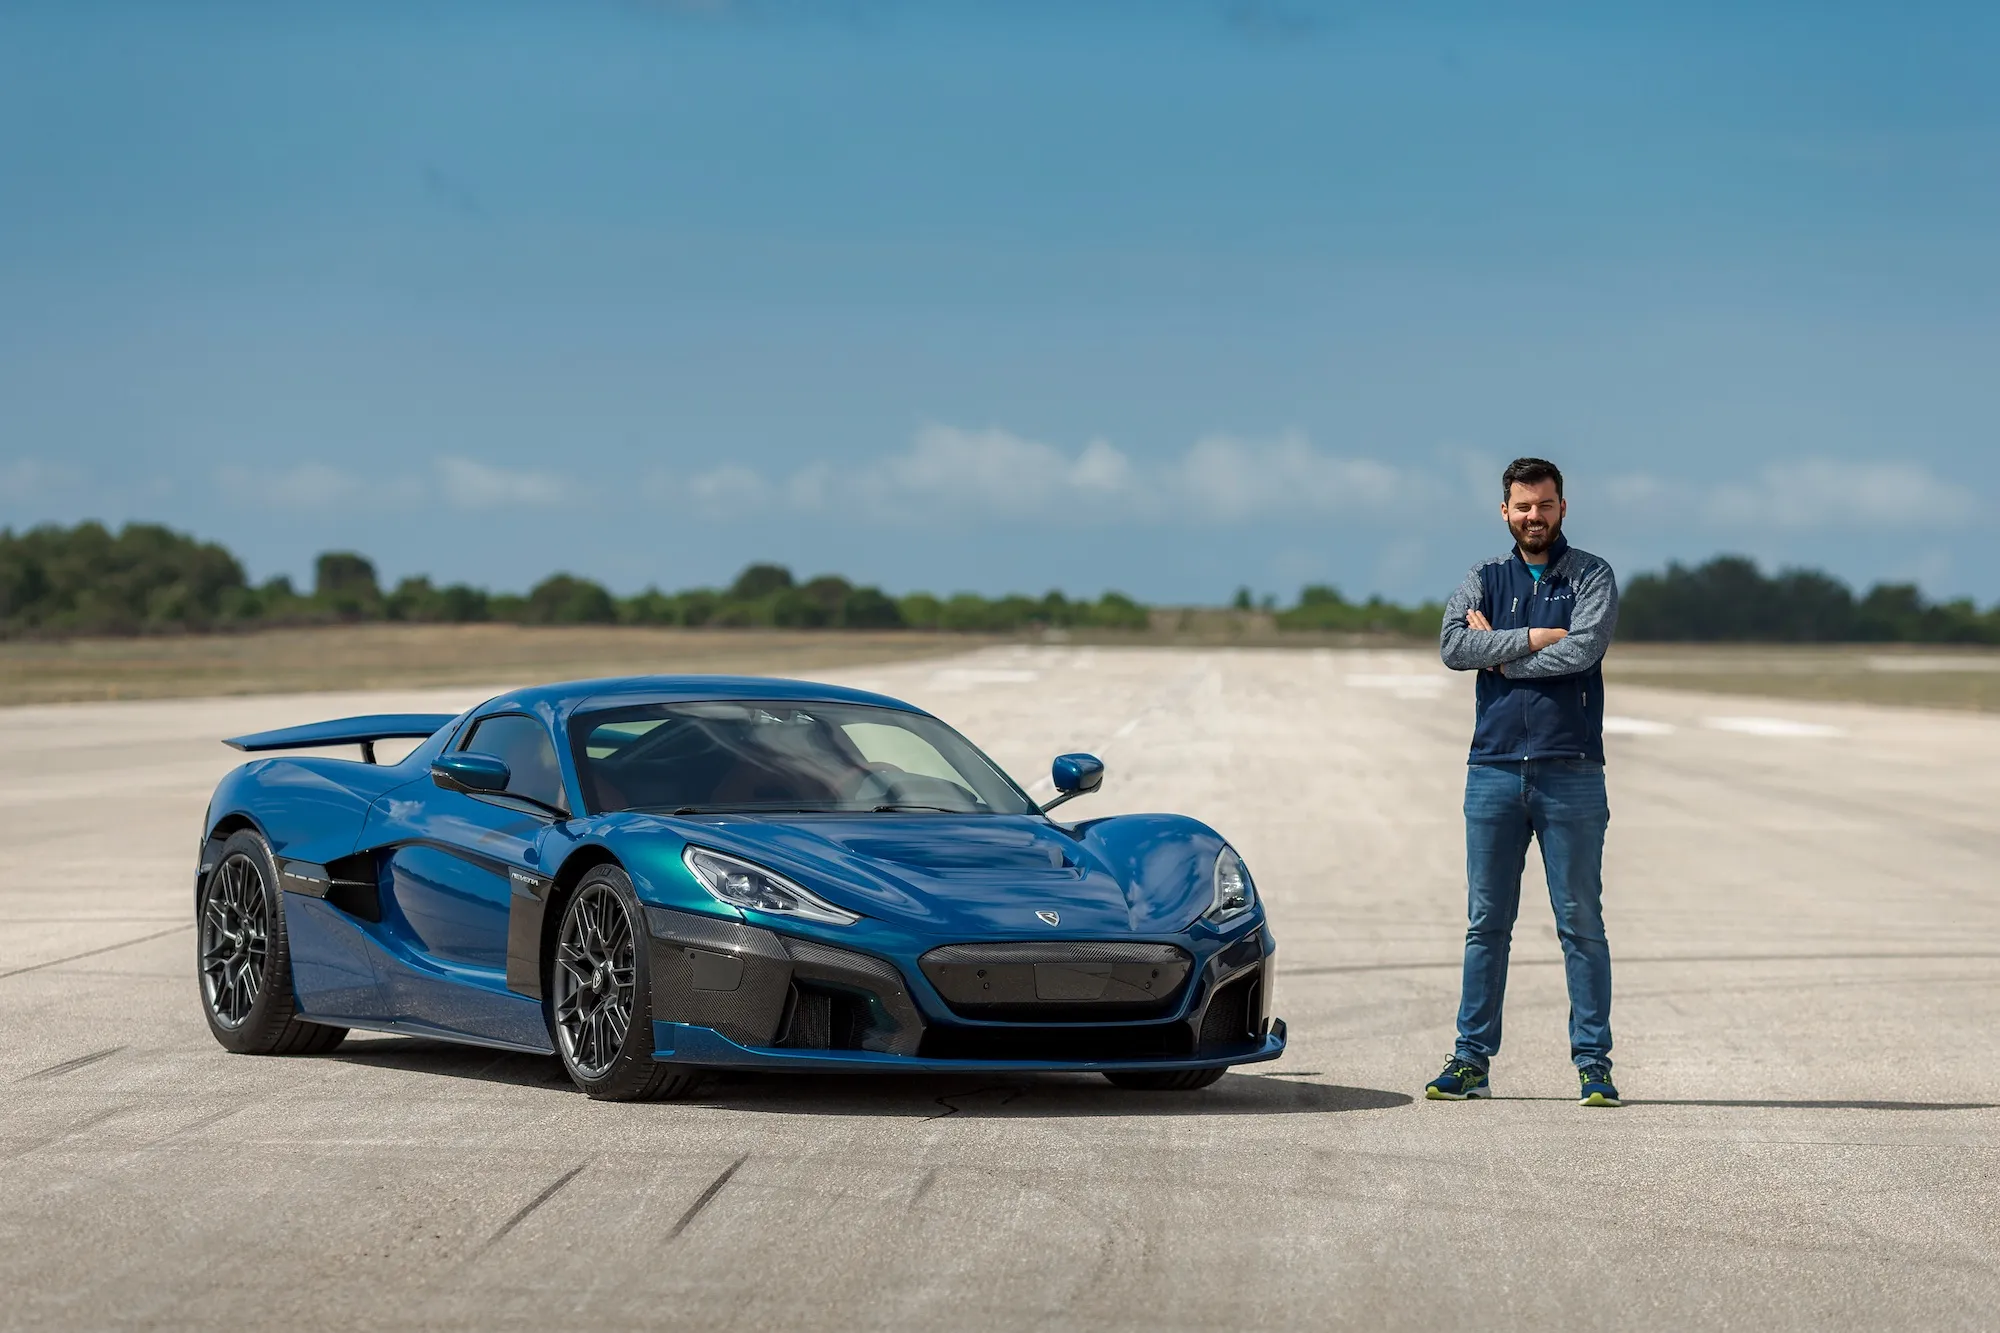 Mate Rimac's Ambitious Plan for Privileged Synthfuel Access